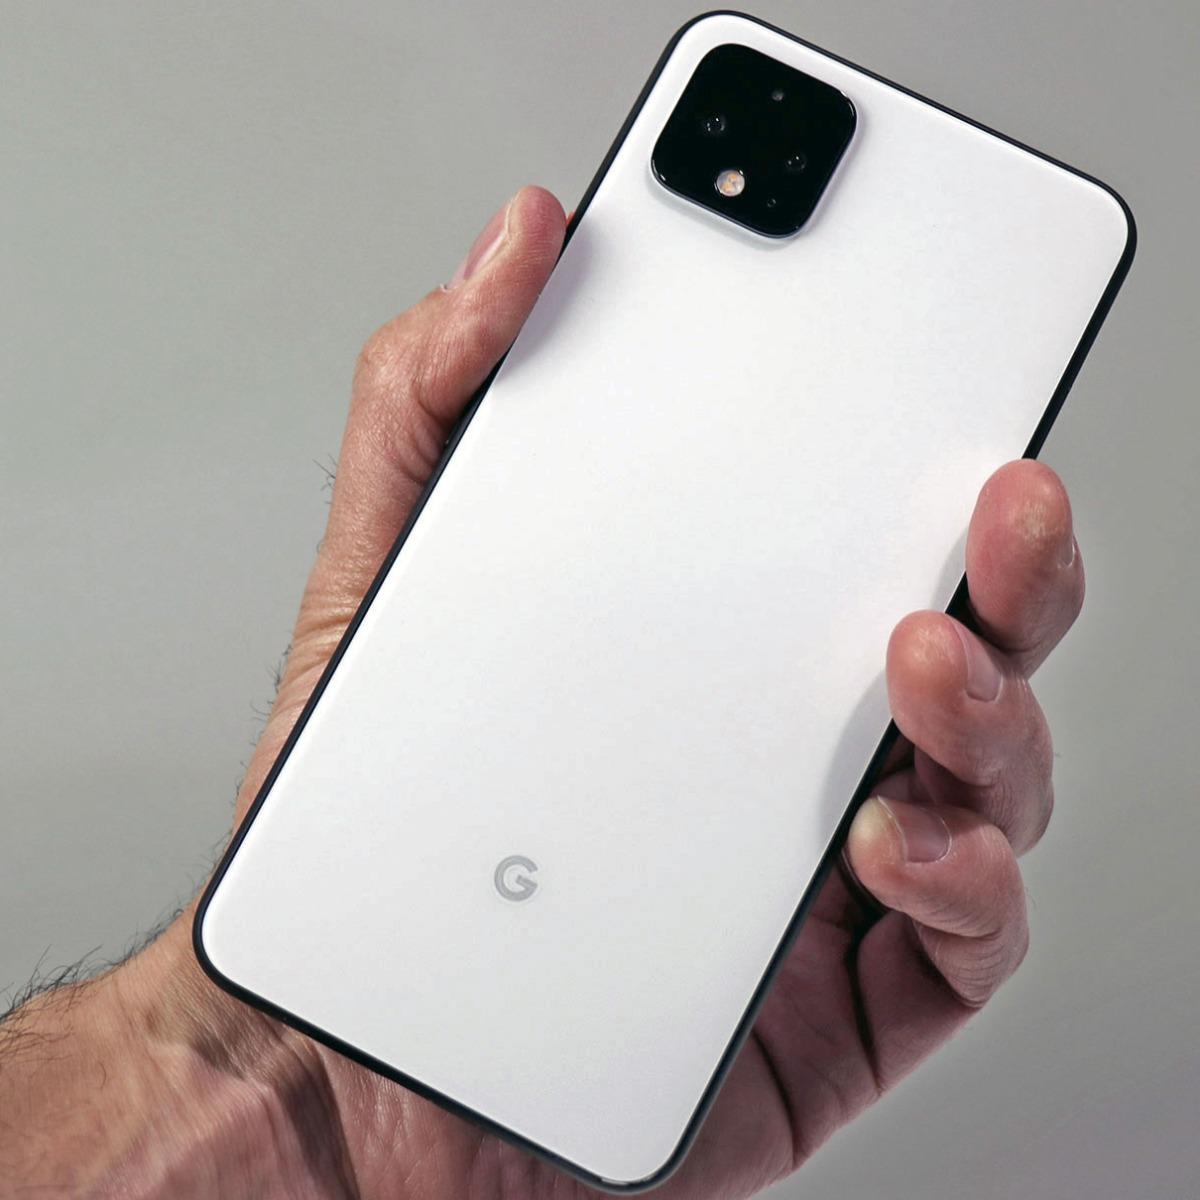 Google Pixel 4 XL Review: Streaks Of Brilliance, Pure Android ...